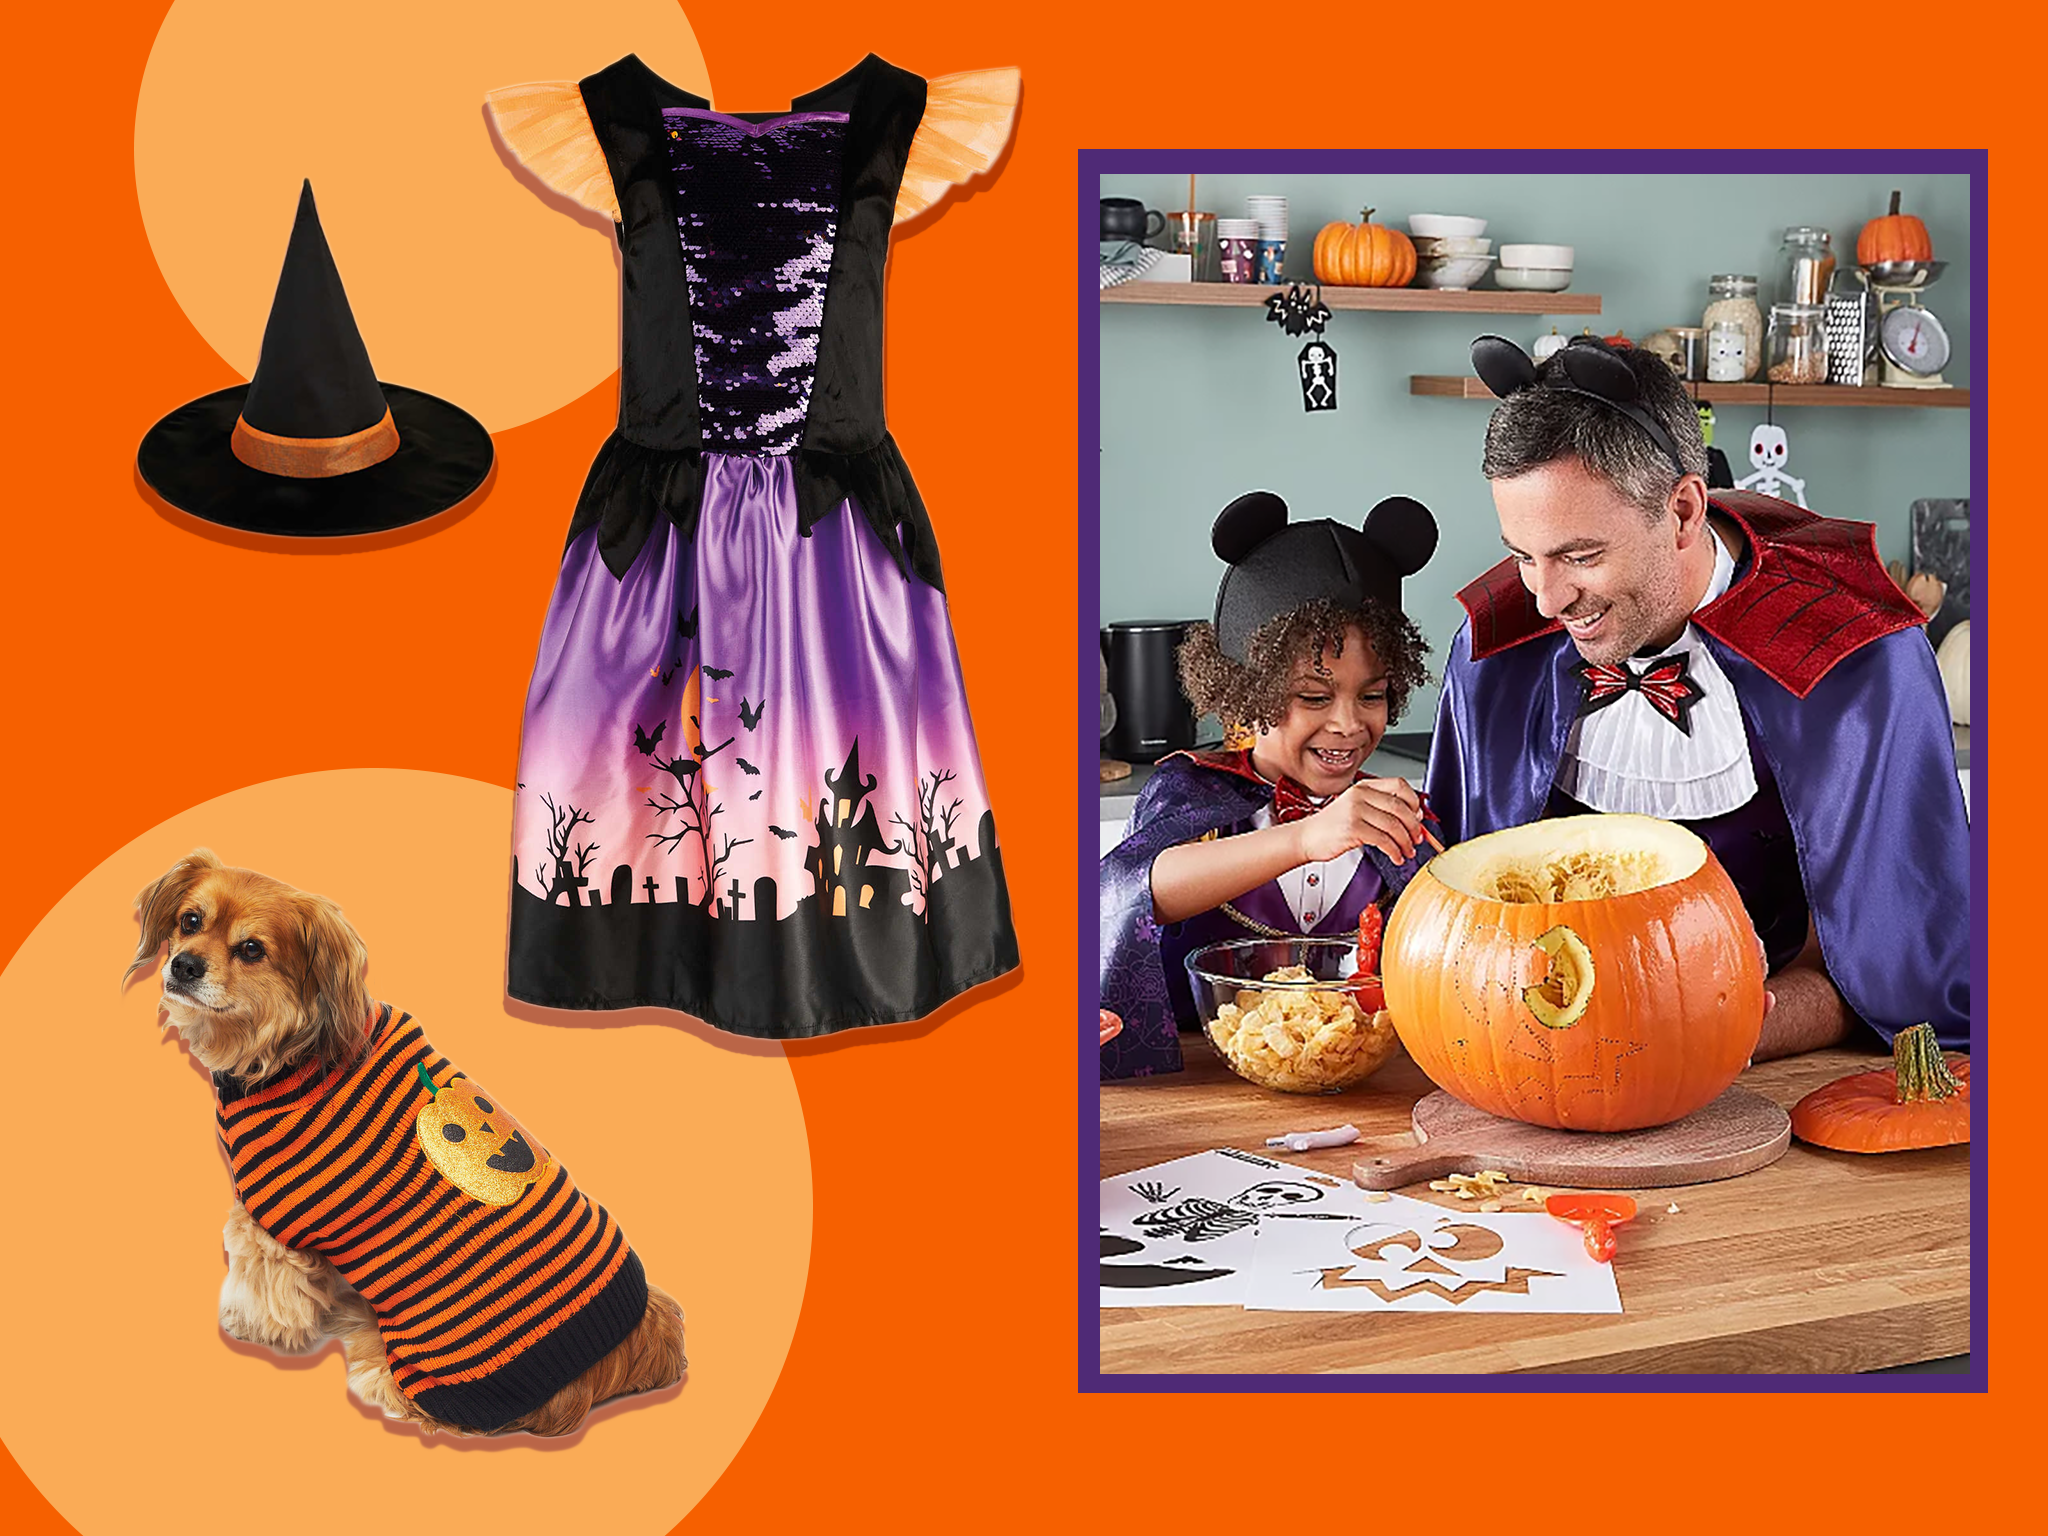 Cheap Halloween costumes for kids and adults Aldi, Amazon and more The Independent